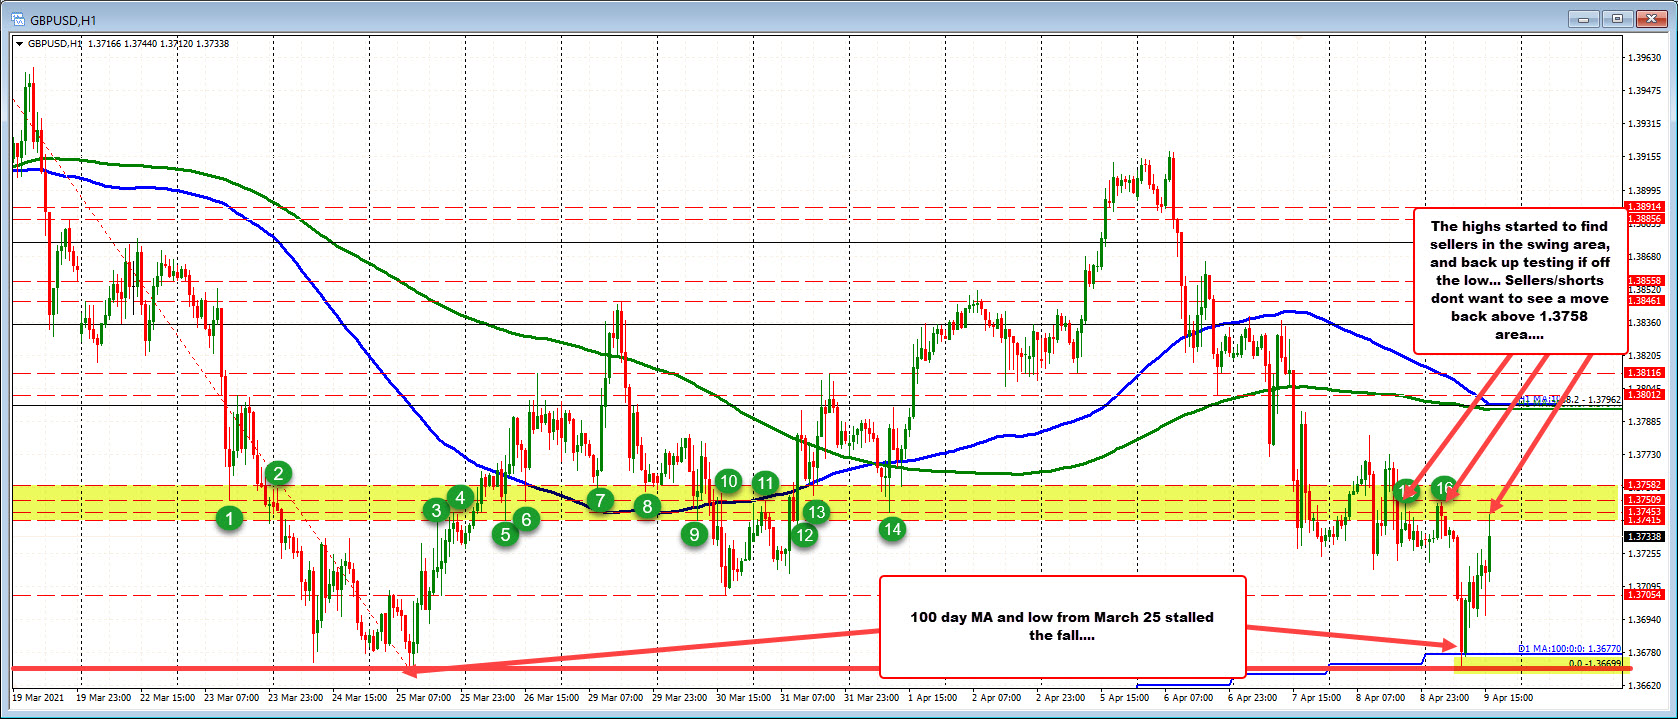 GBPUSD dips below 100 day MA, but bounces back higher